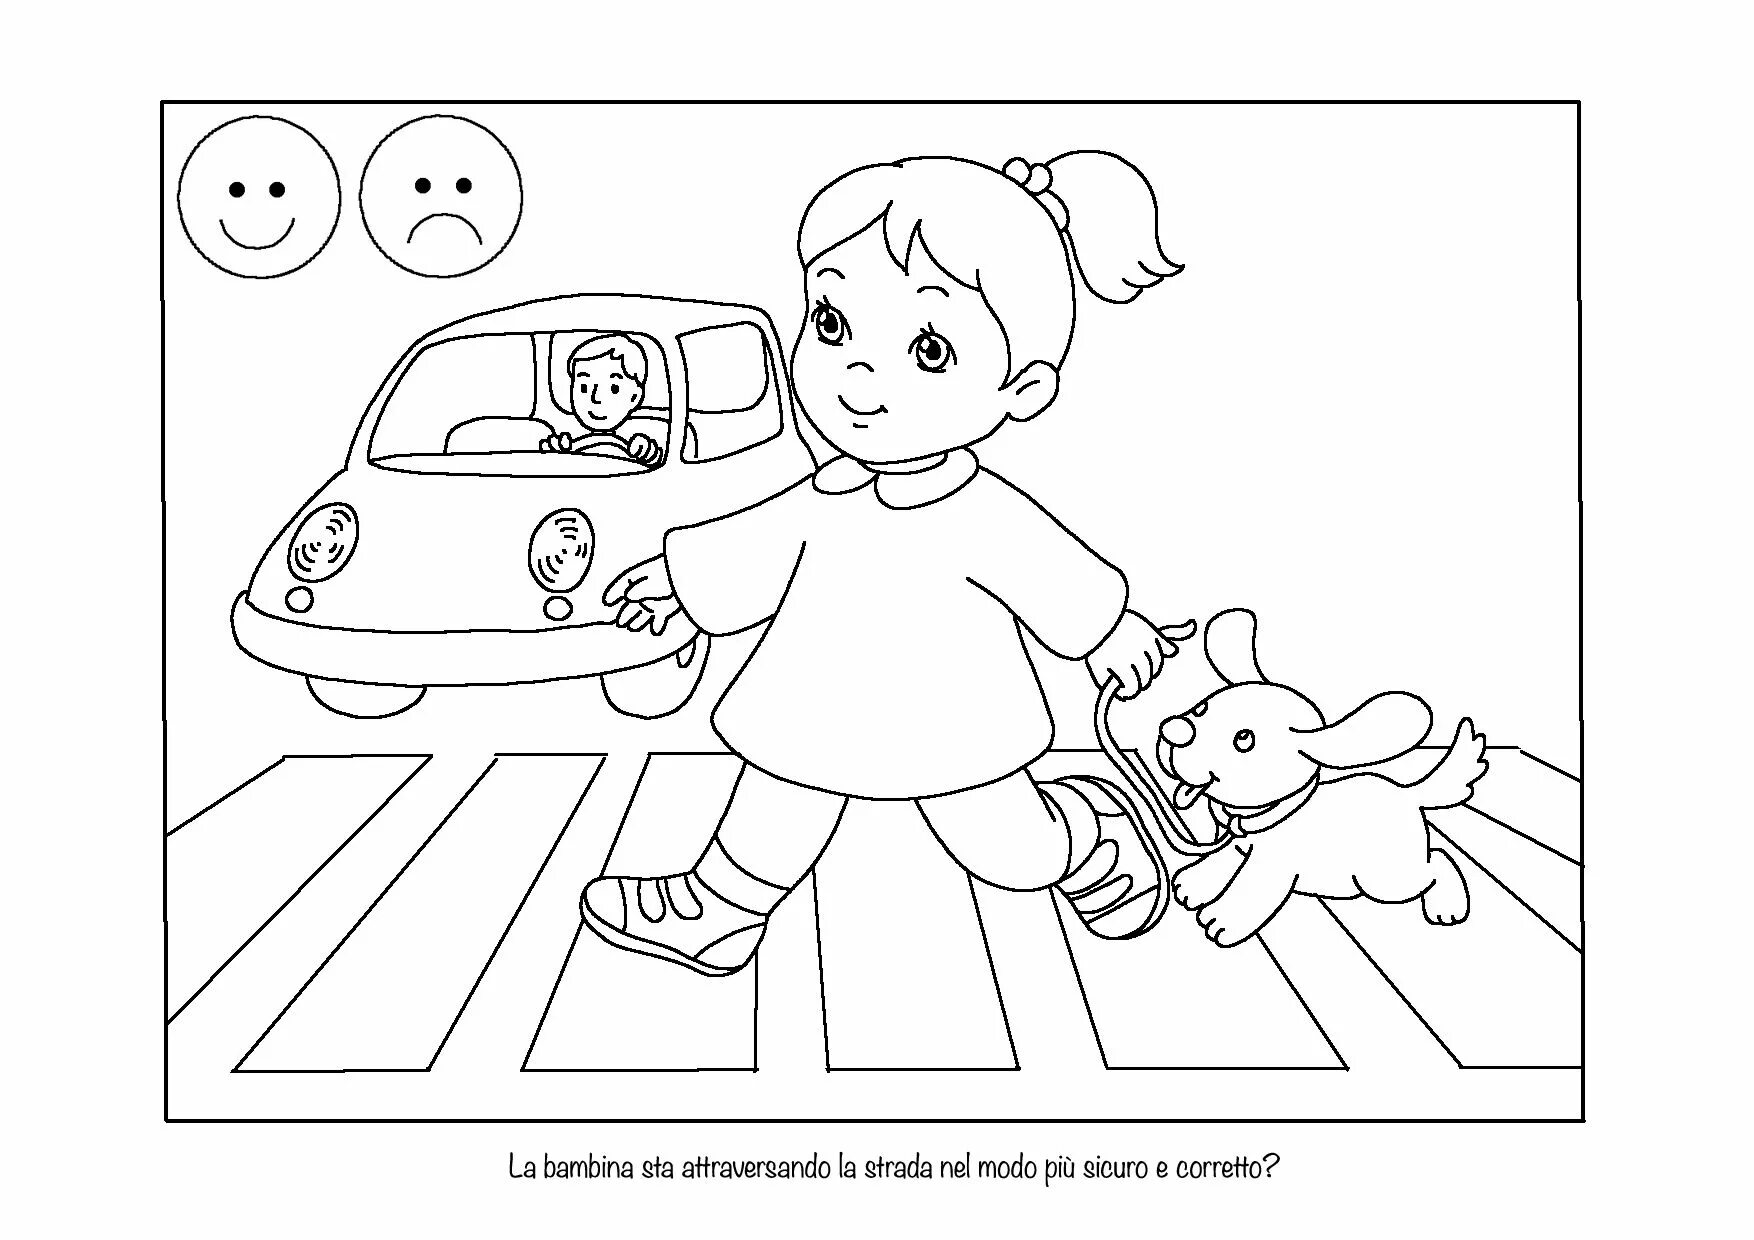 According to traffic rules for preschoolers preparatory group #21